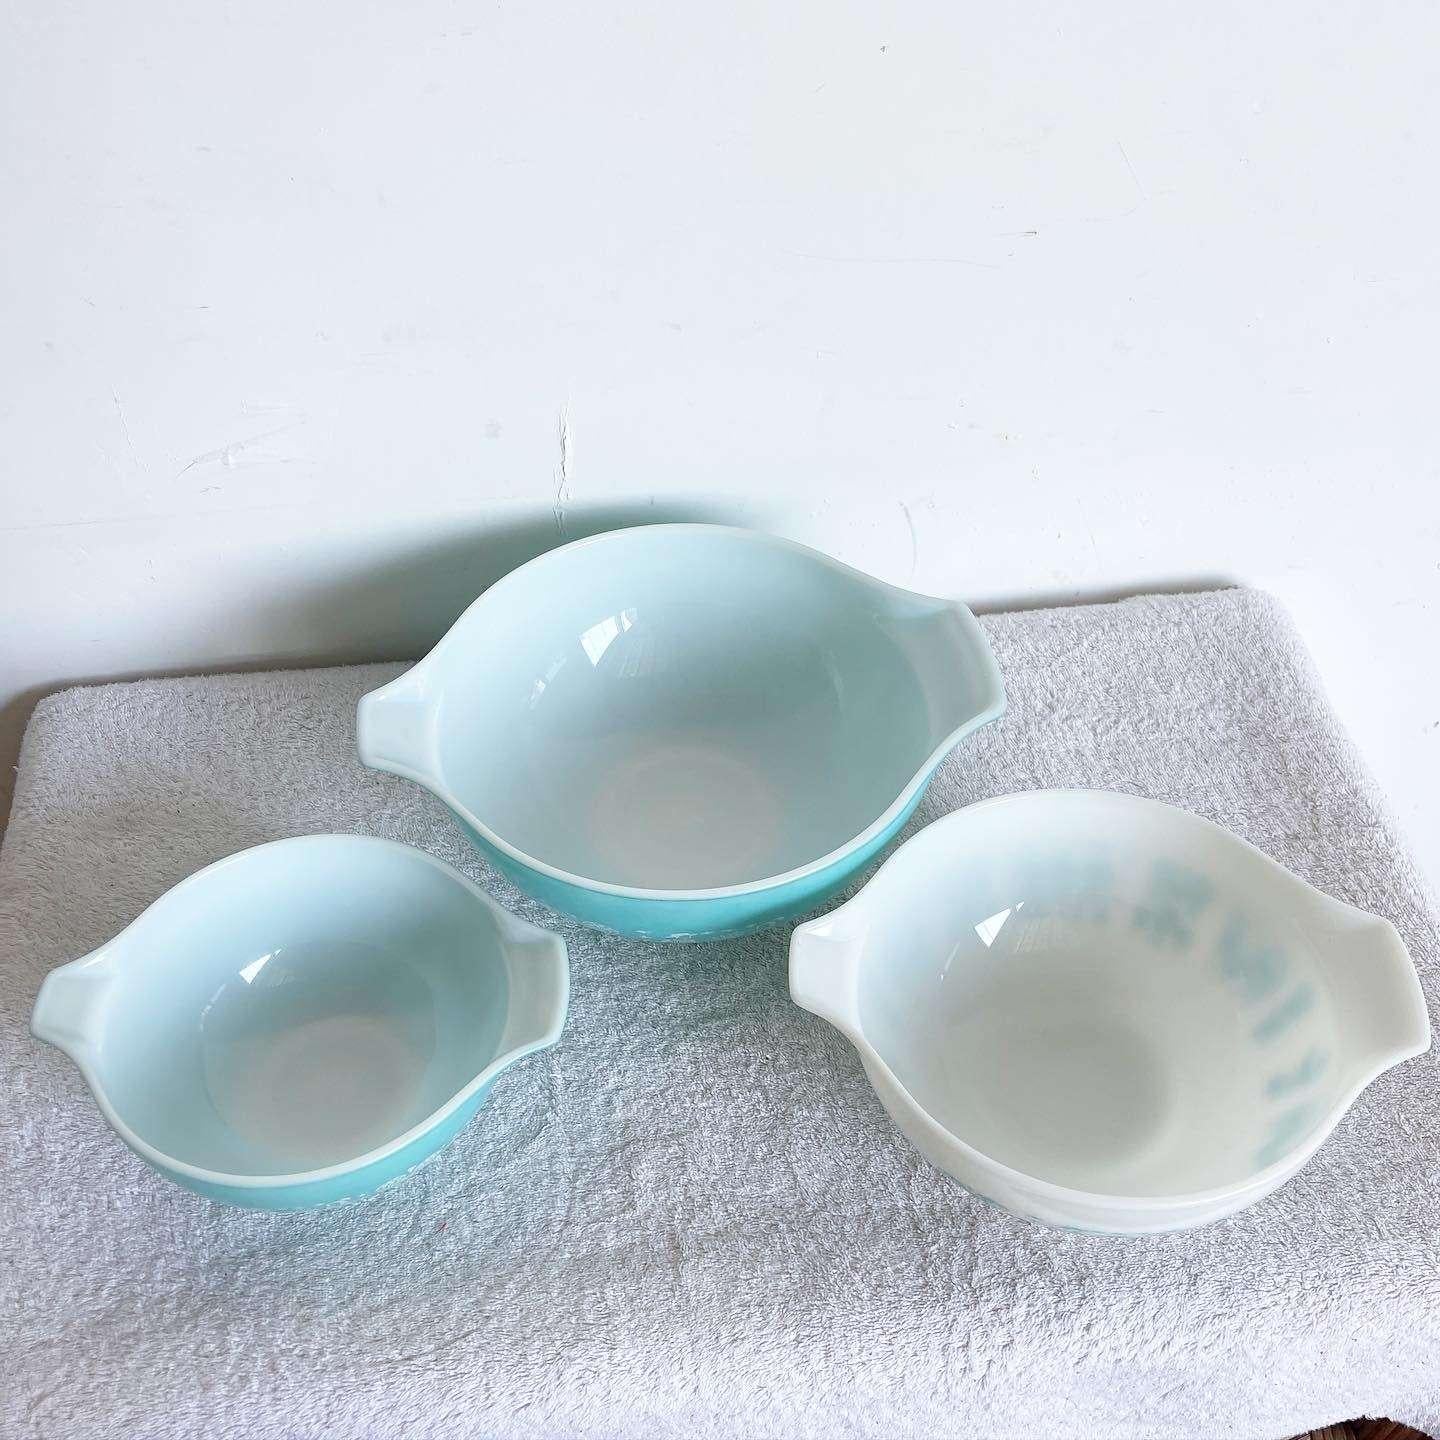 Revive the charm of the past with this delightful set of Vintage Butterprint Bowls by Pyrex. Featuring the iconic 